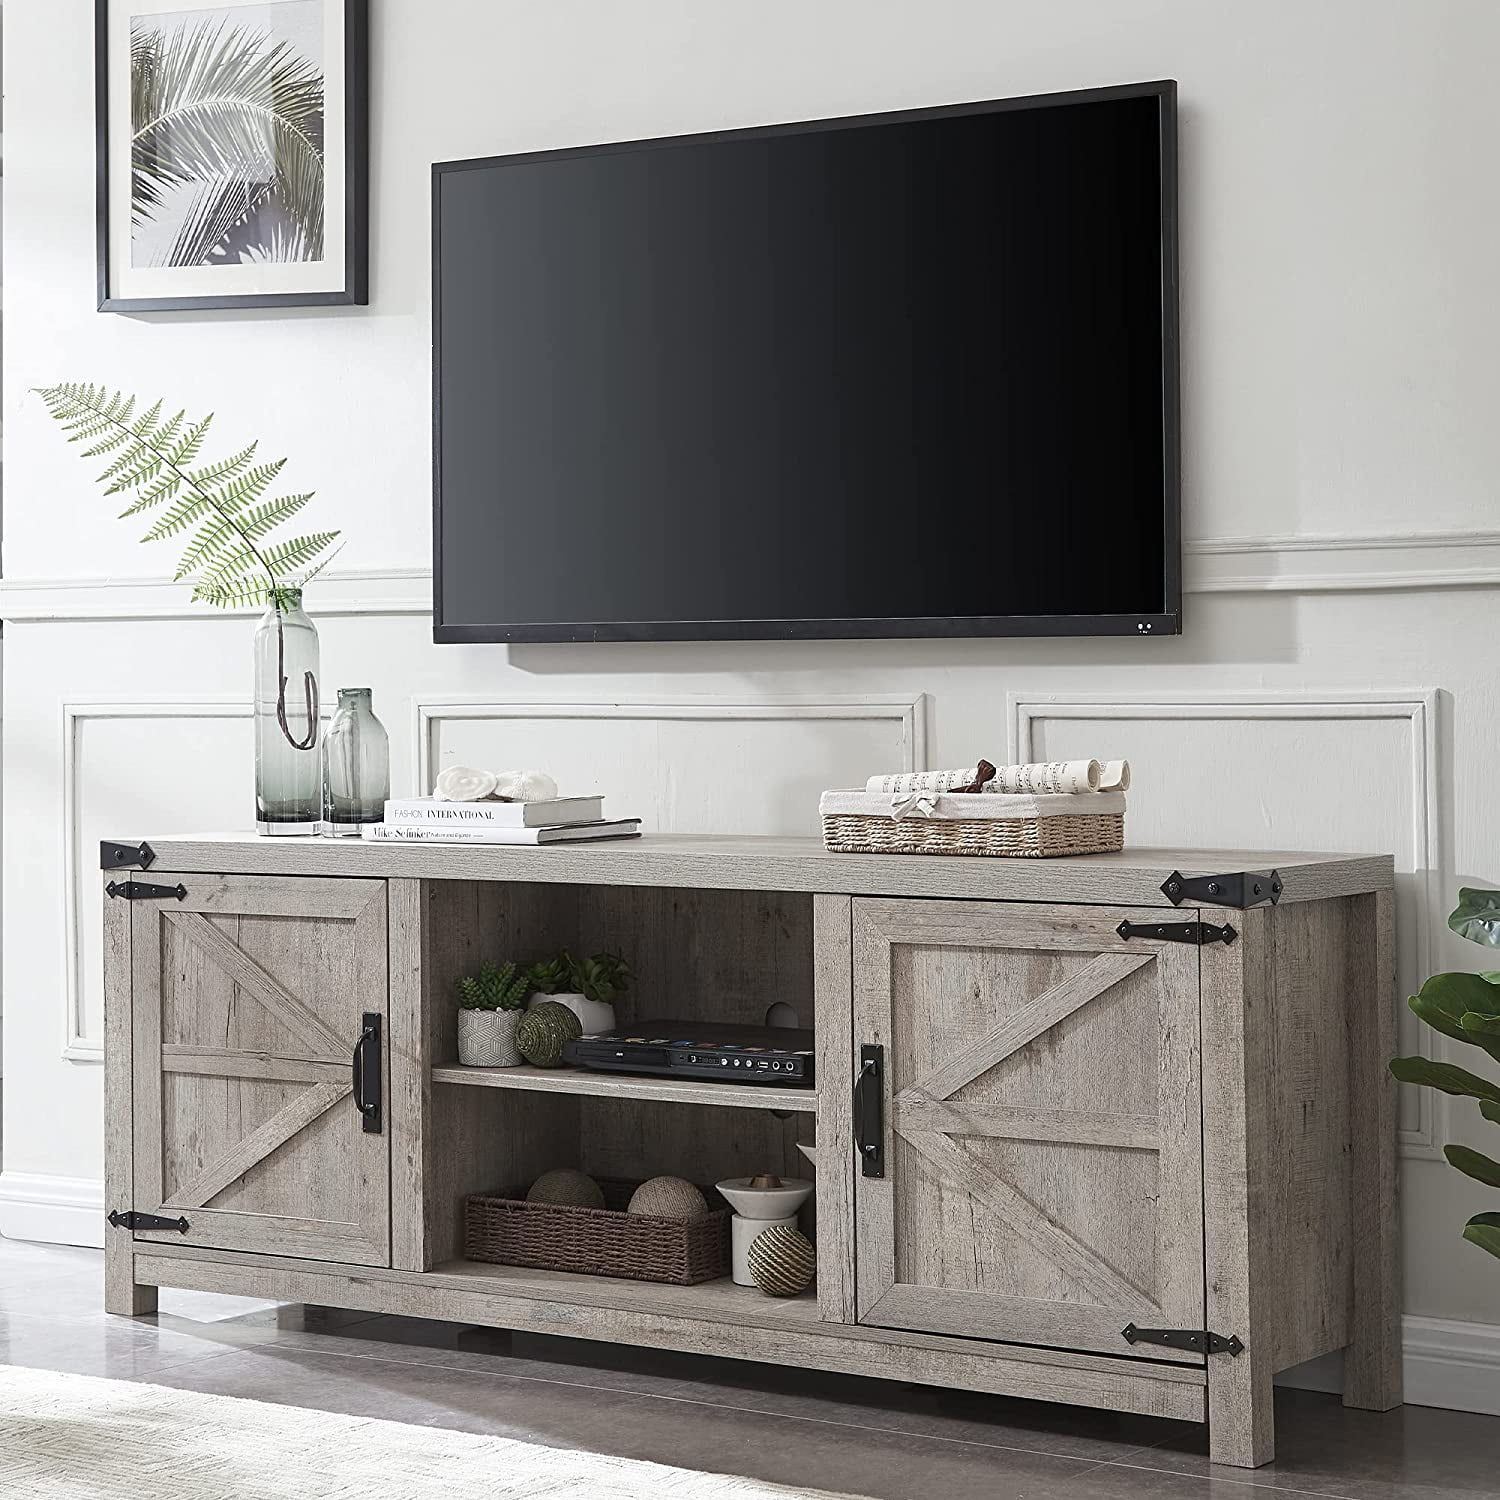 Okd Farmhouse Tv Stand For Tvs Up To 75 Inches, Wood Barn Door Media  Television Console Table With Storage Cabinets Shelves, Grey Wash –  Walmart Pertaining To Barn Door Media Tv Stands (Photo 2 of 15)